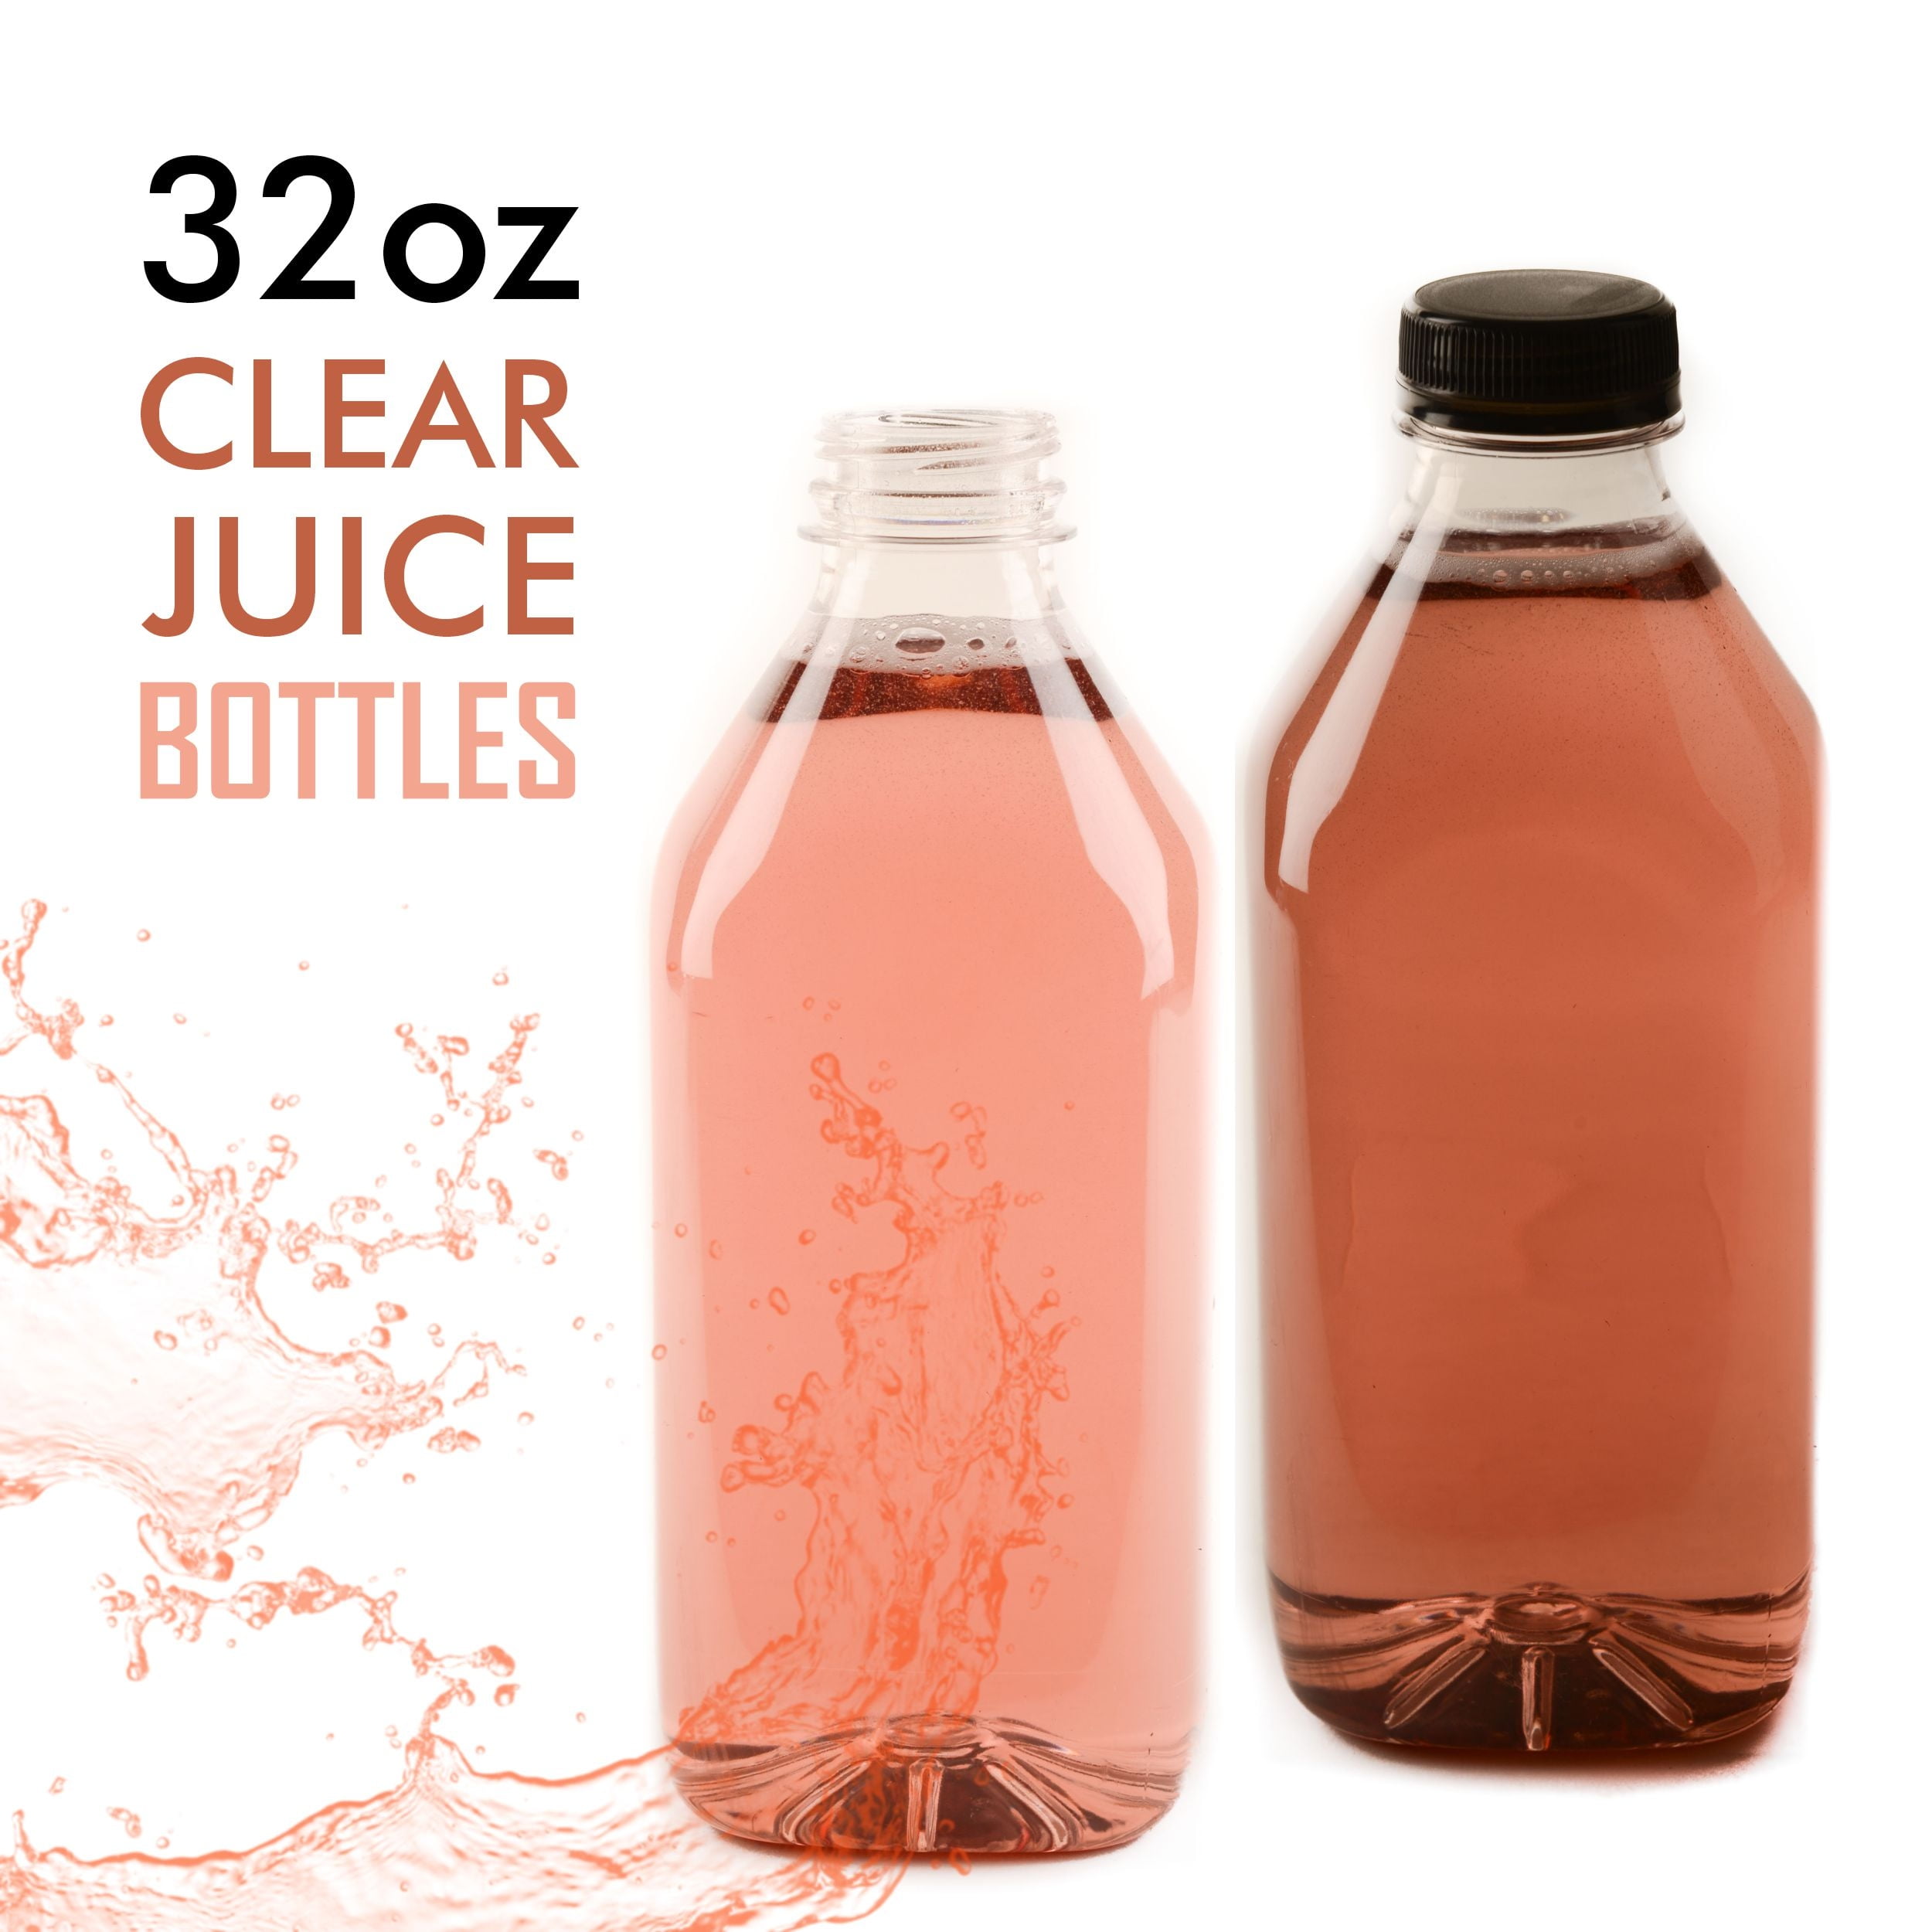 20 Pack] Empty Clear Plastic Juice Bottles with Tamper Evident